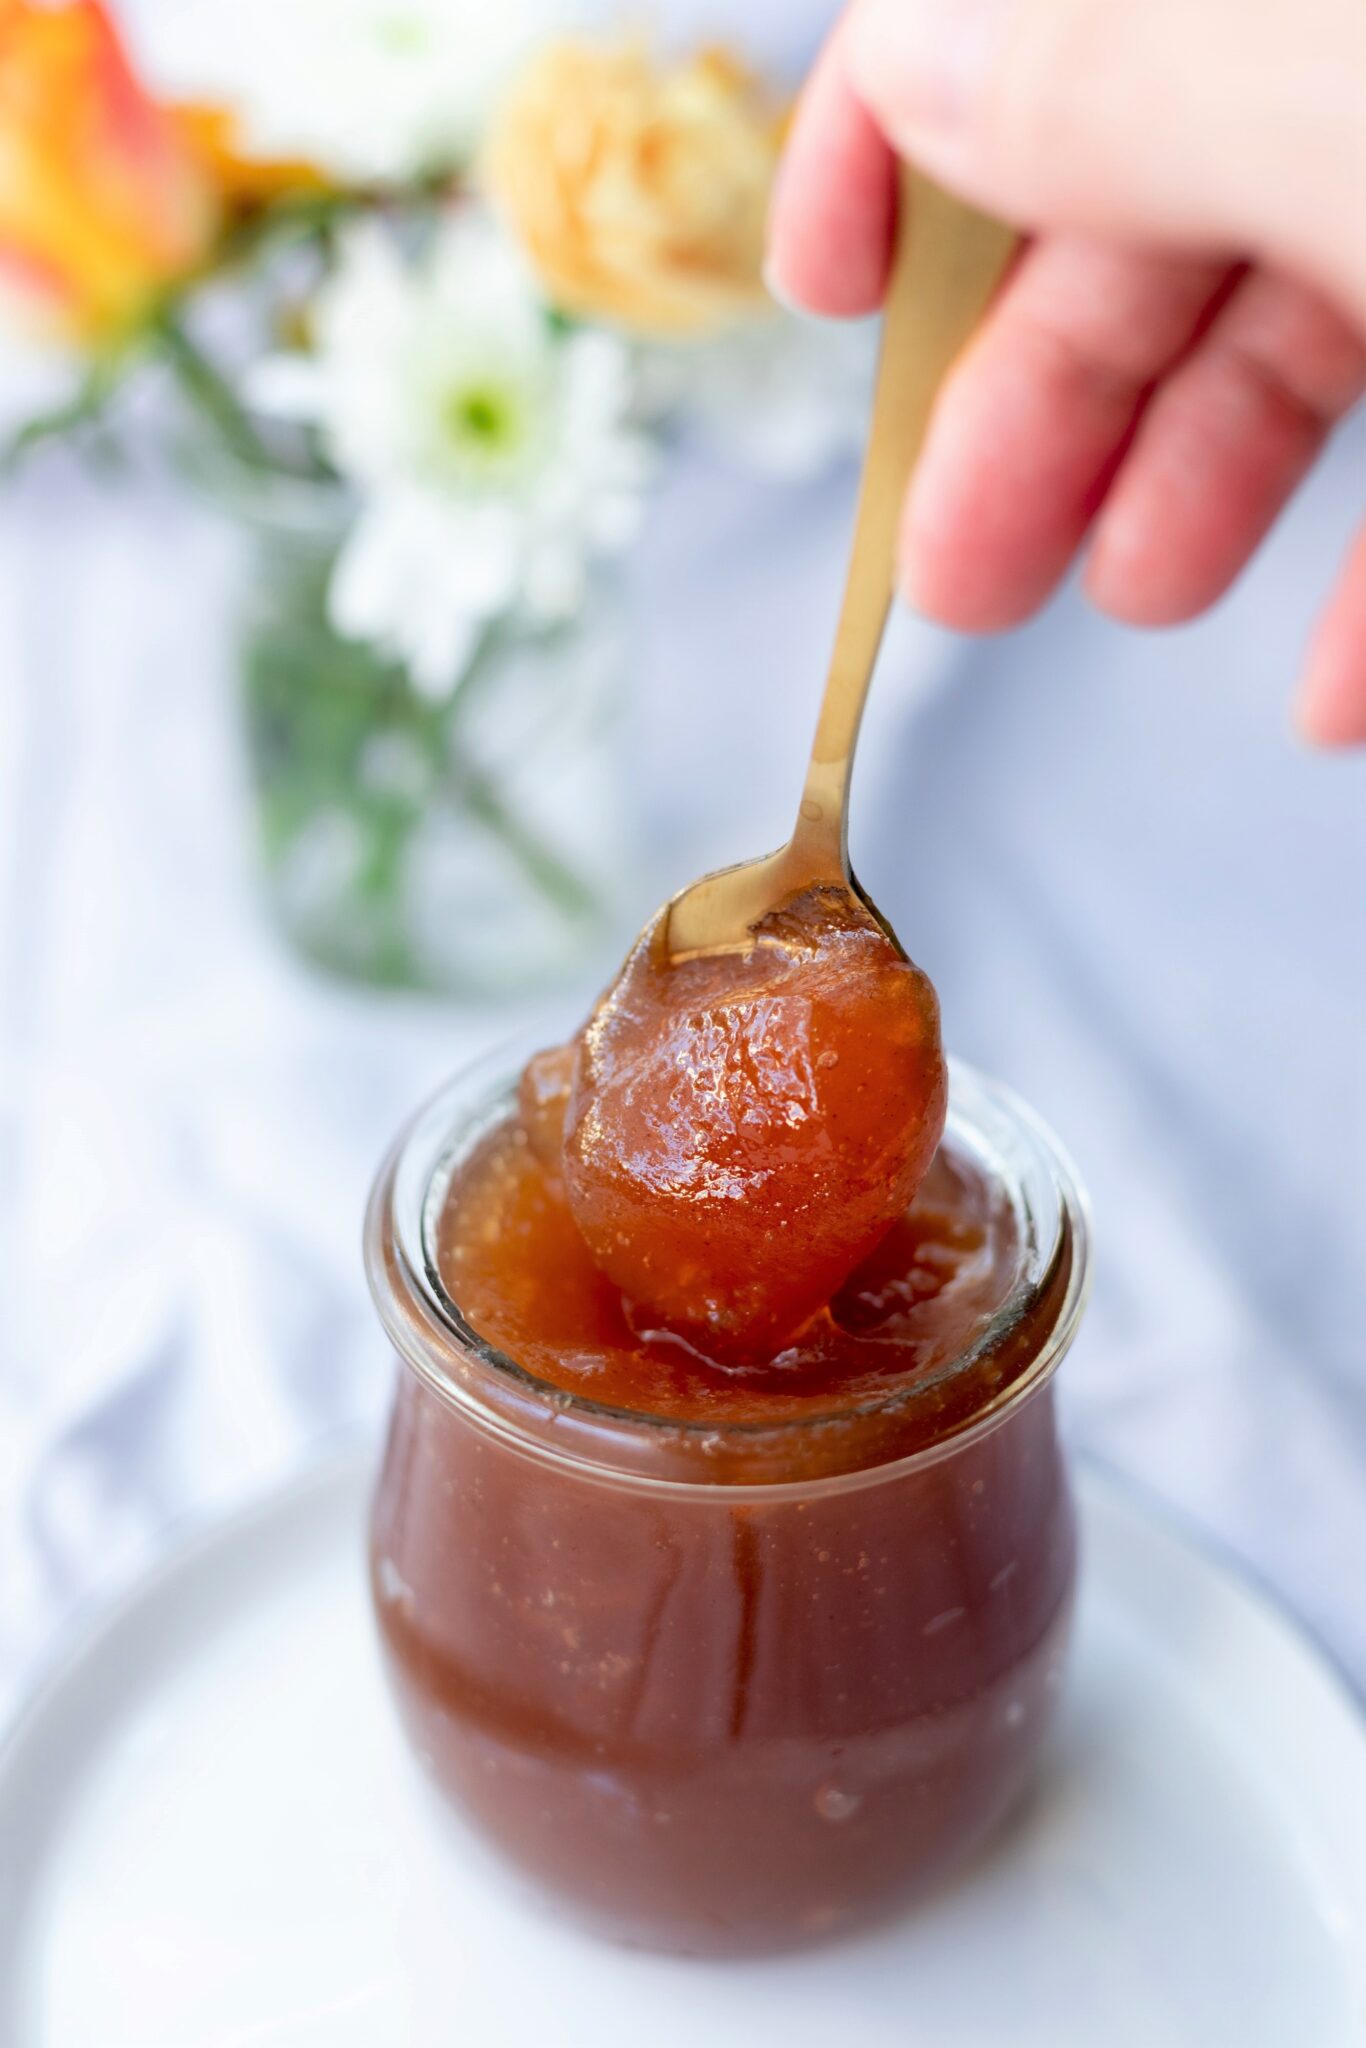 Knowing the Difference Between Jellies, Jams, Preserves & More